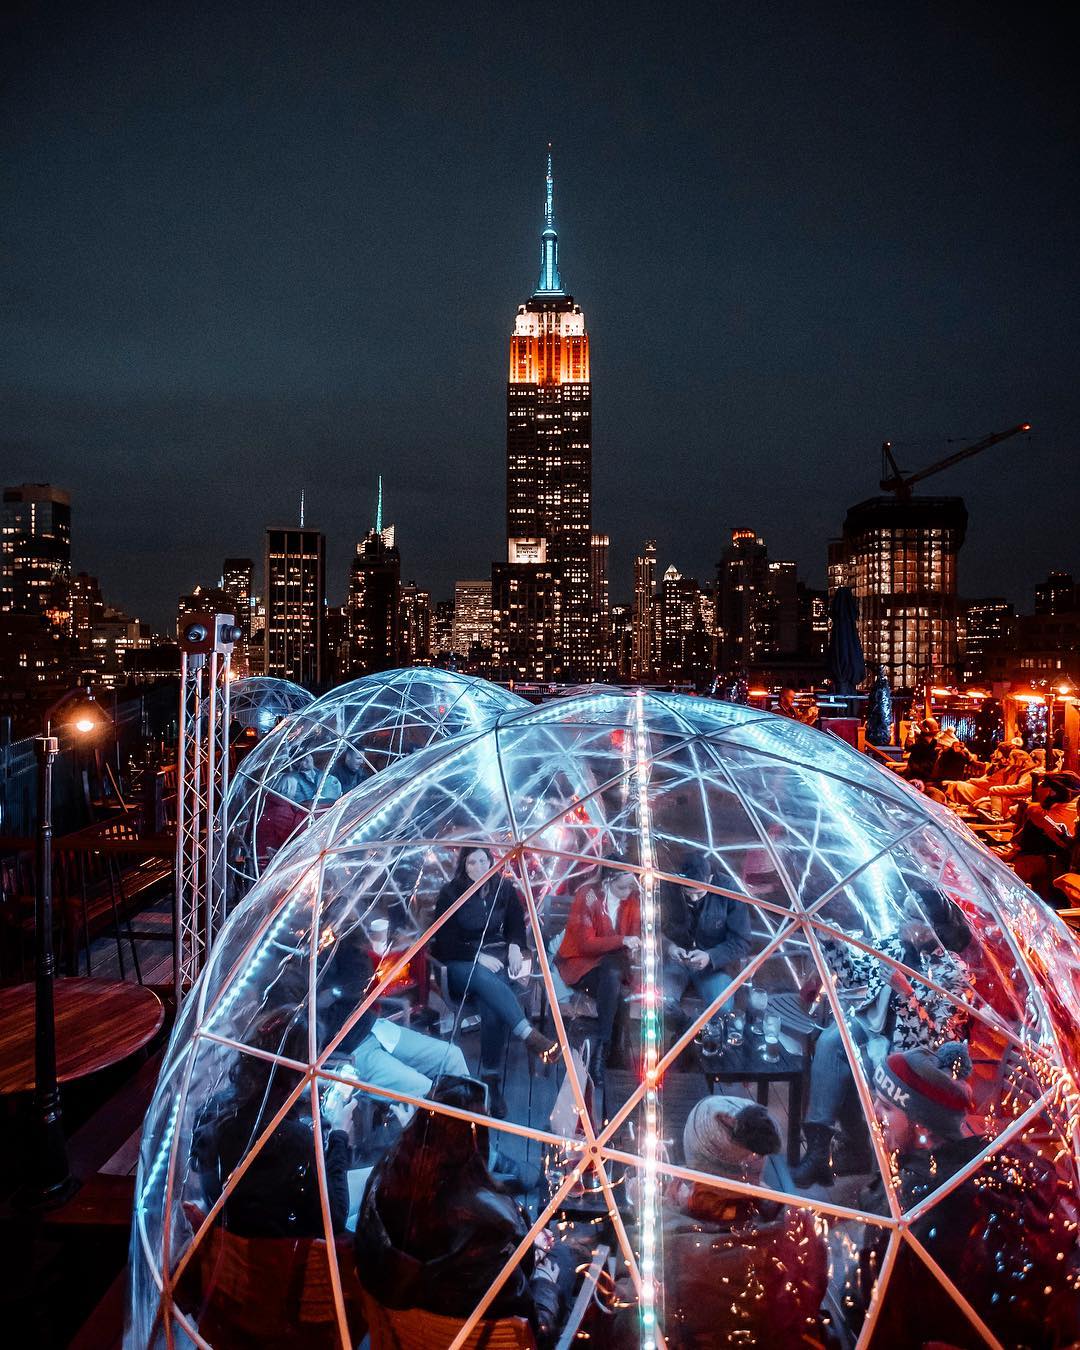 New York City building rooftop with people sitting inside heated plastic domes. 